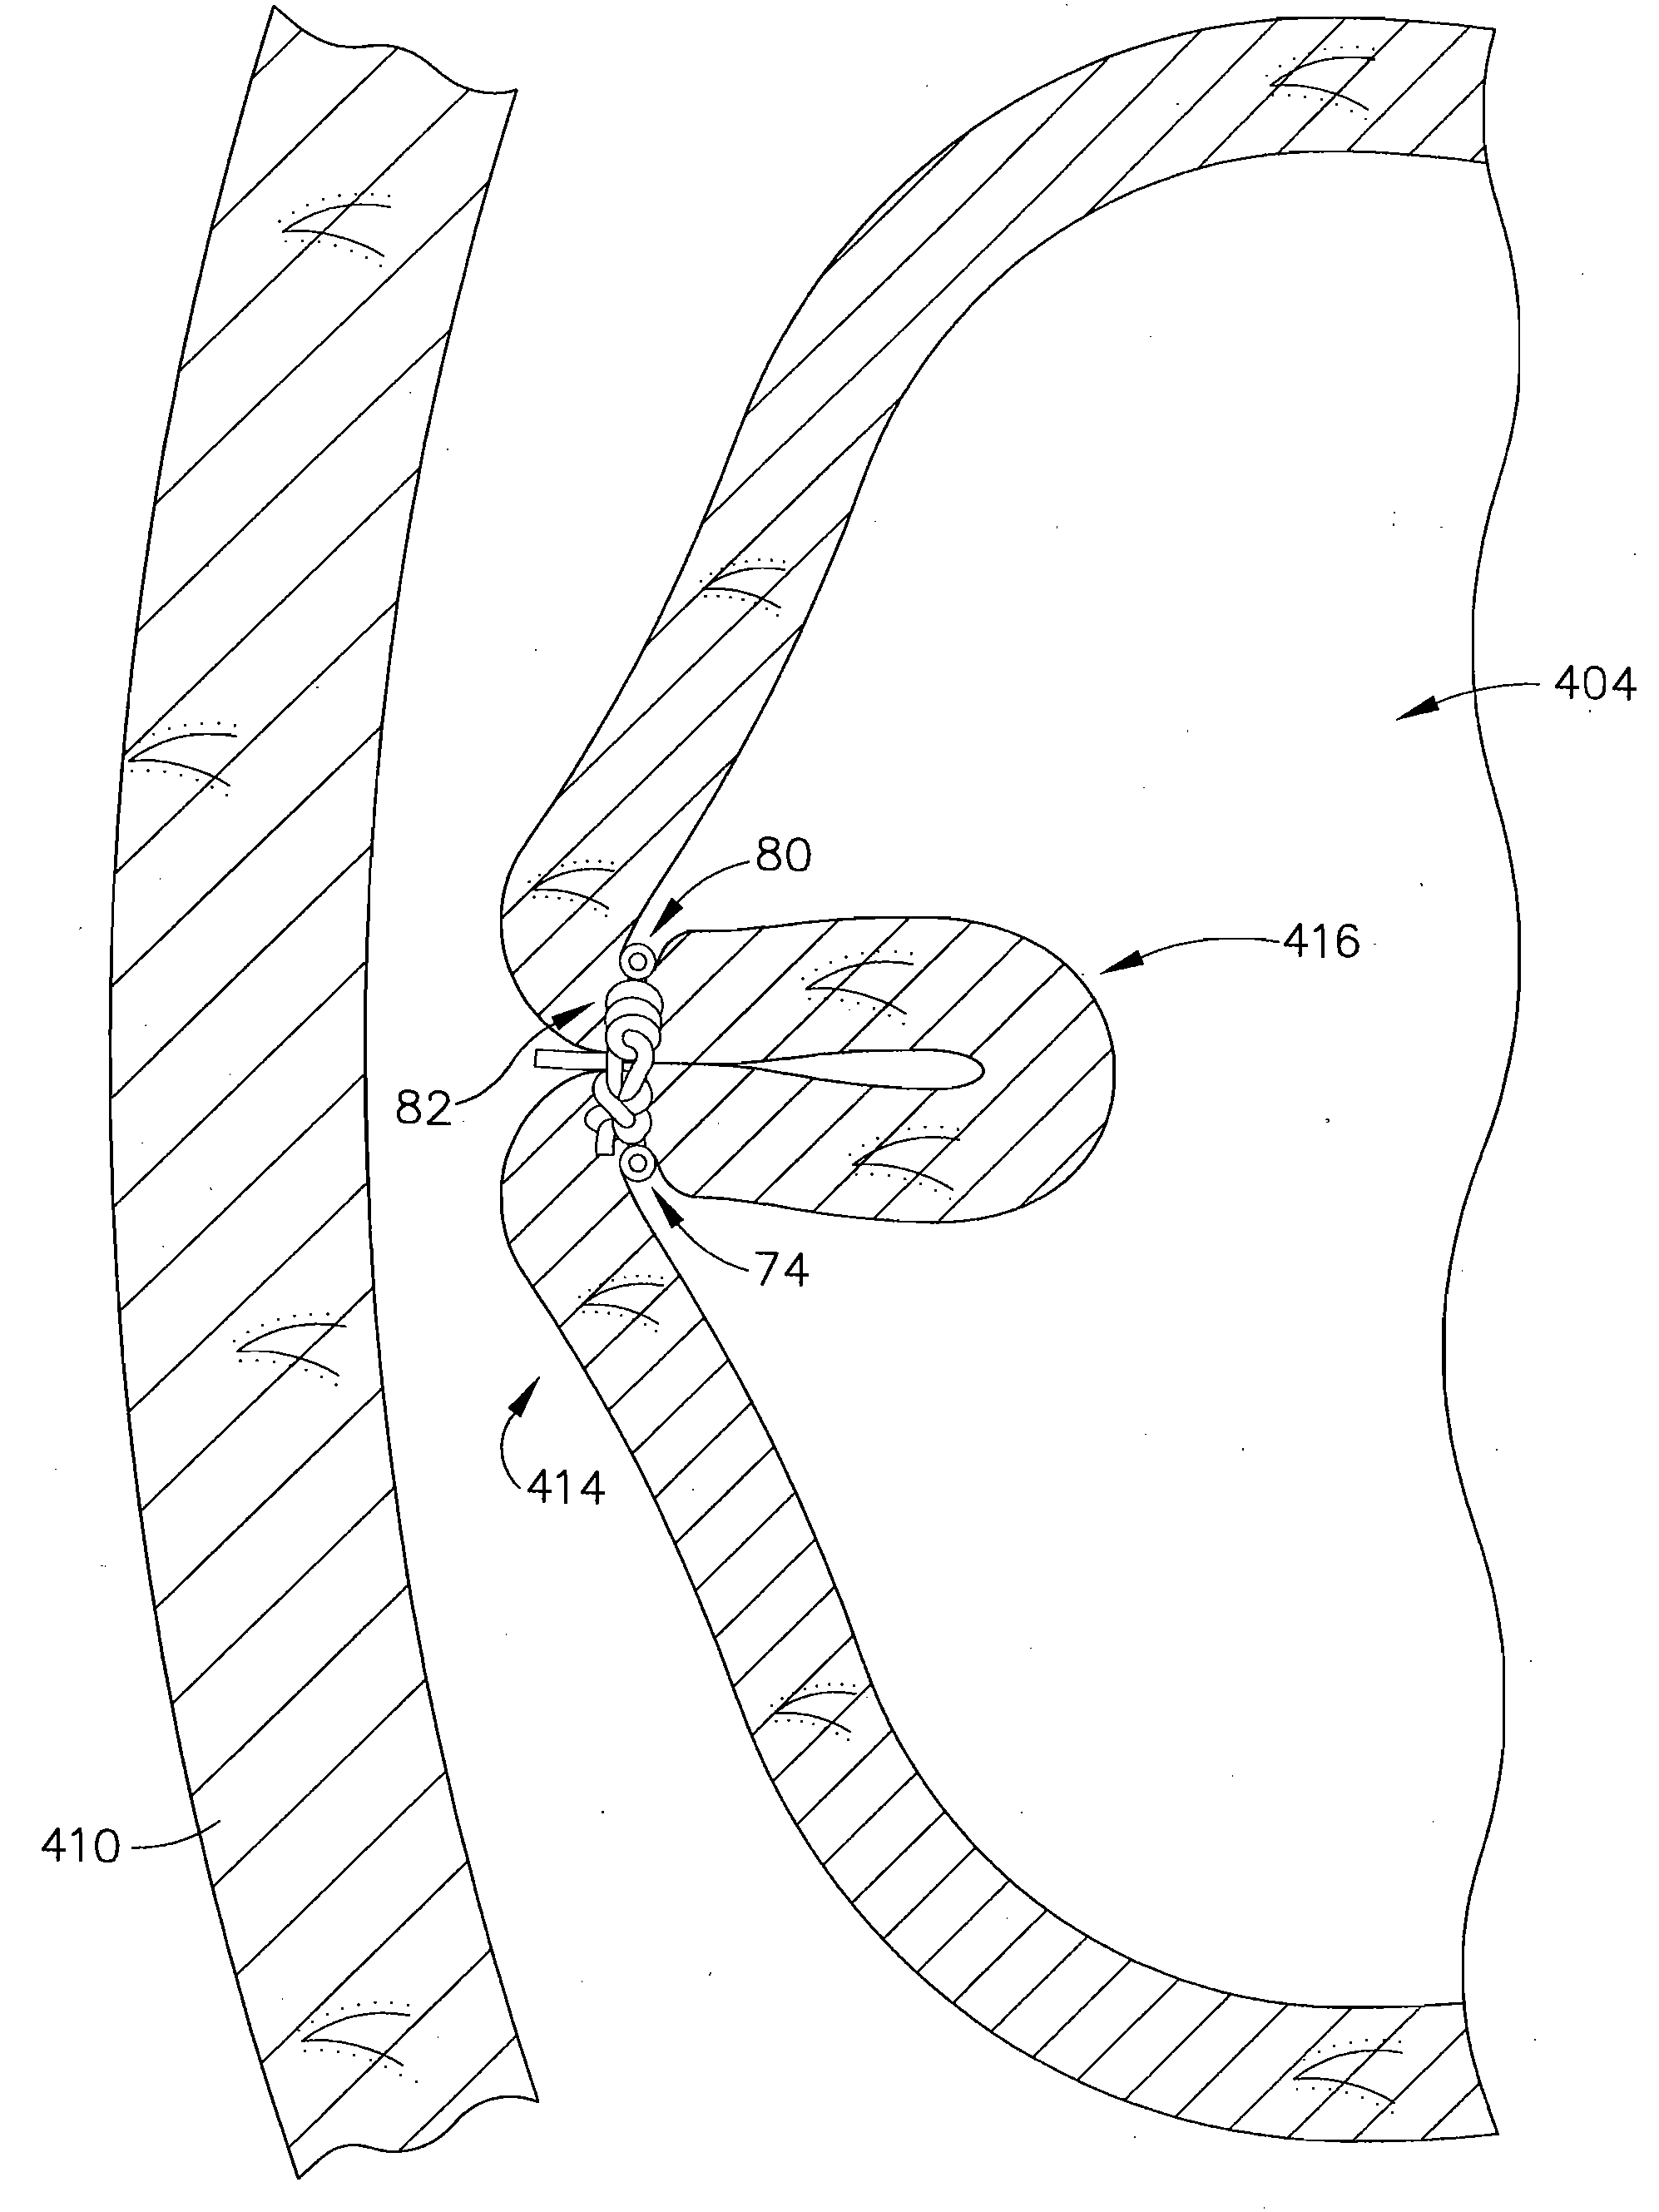 Disposable cartridge for use in a gastric volume reduction procedure